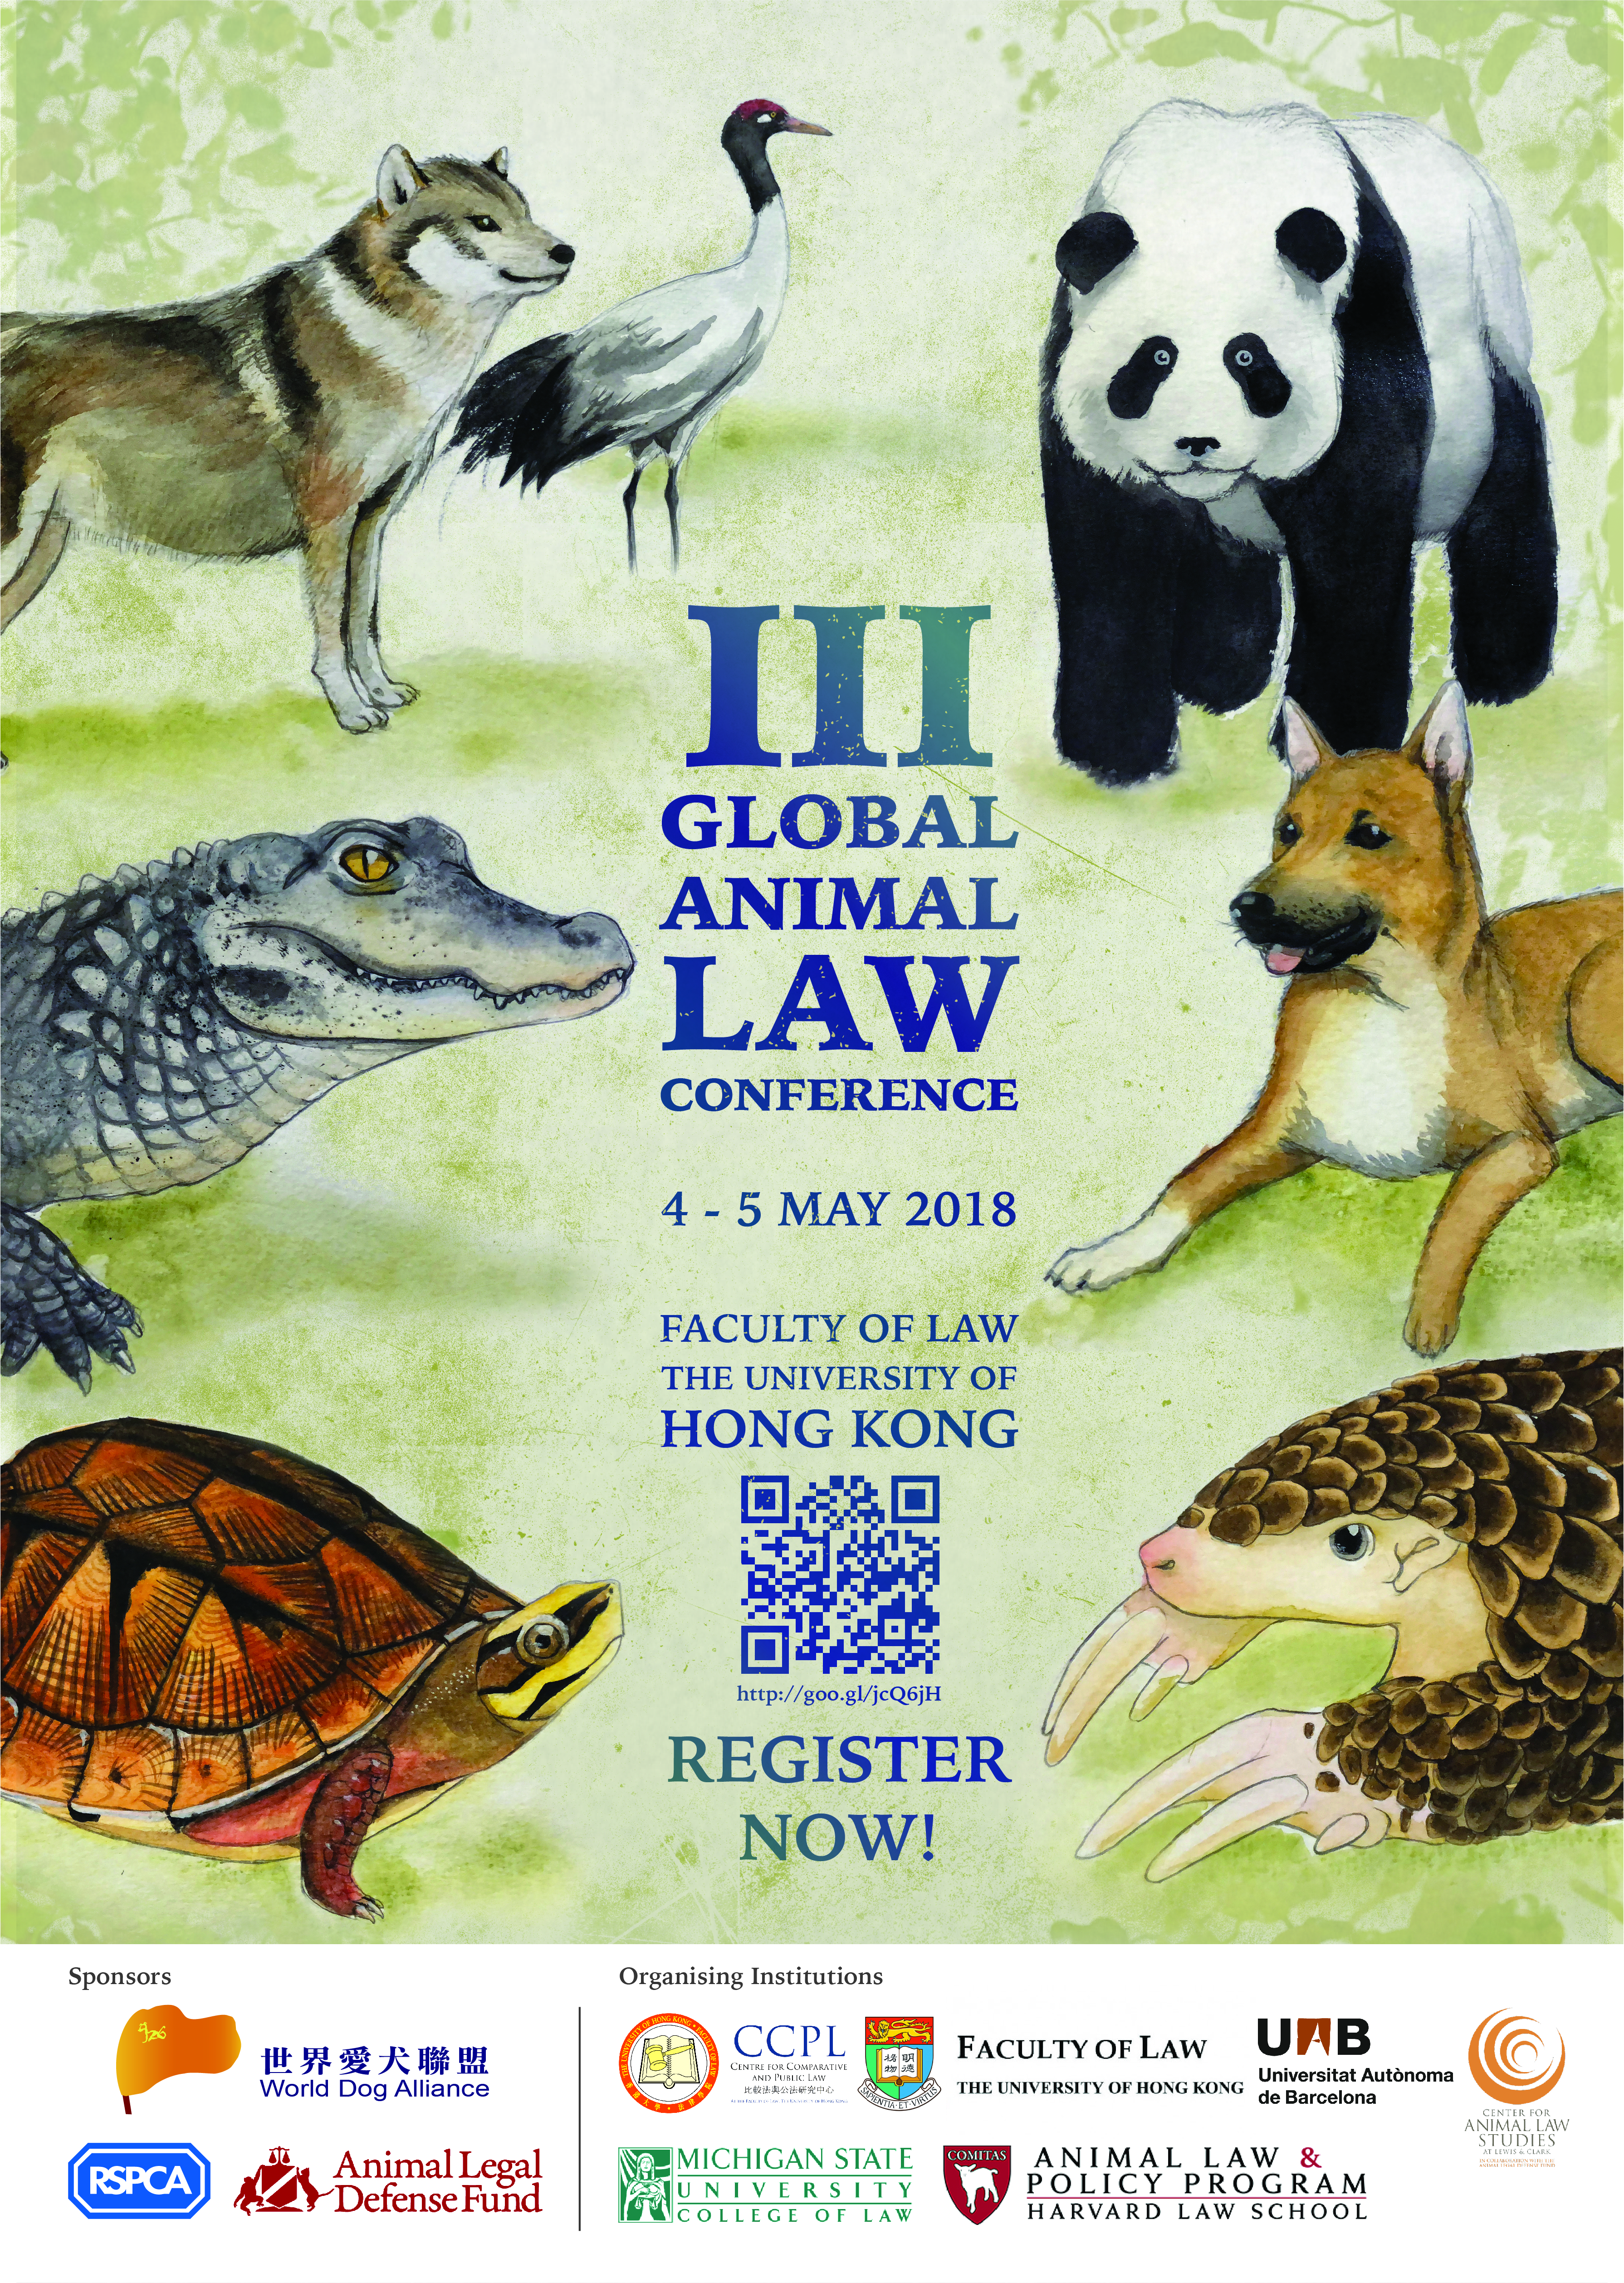 Global Animal Law Conference III | Animal Legal & Historical Center